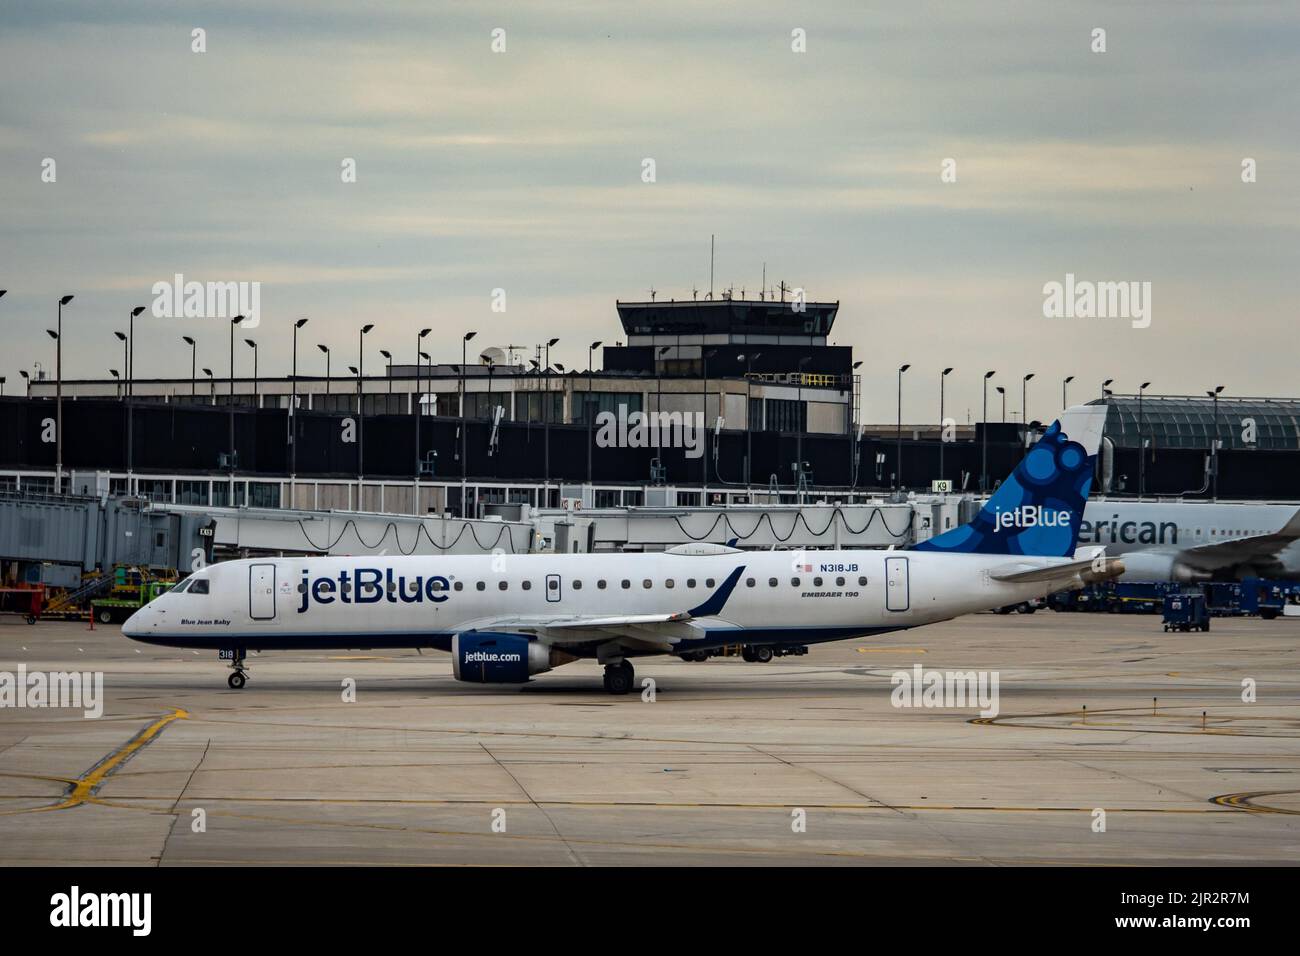 jetBlue Airlines airplane on taxiway at JFK airport in New York Stock Photo